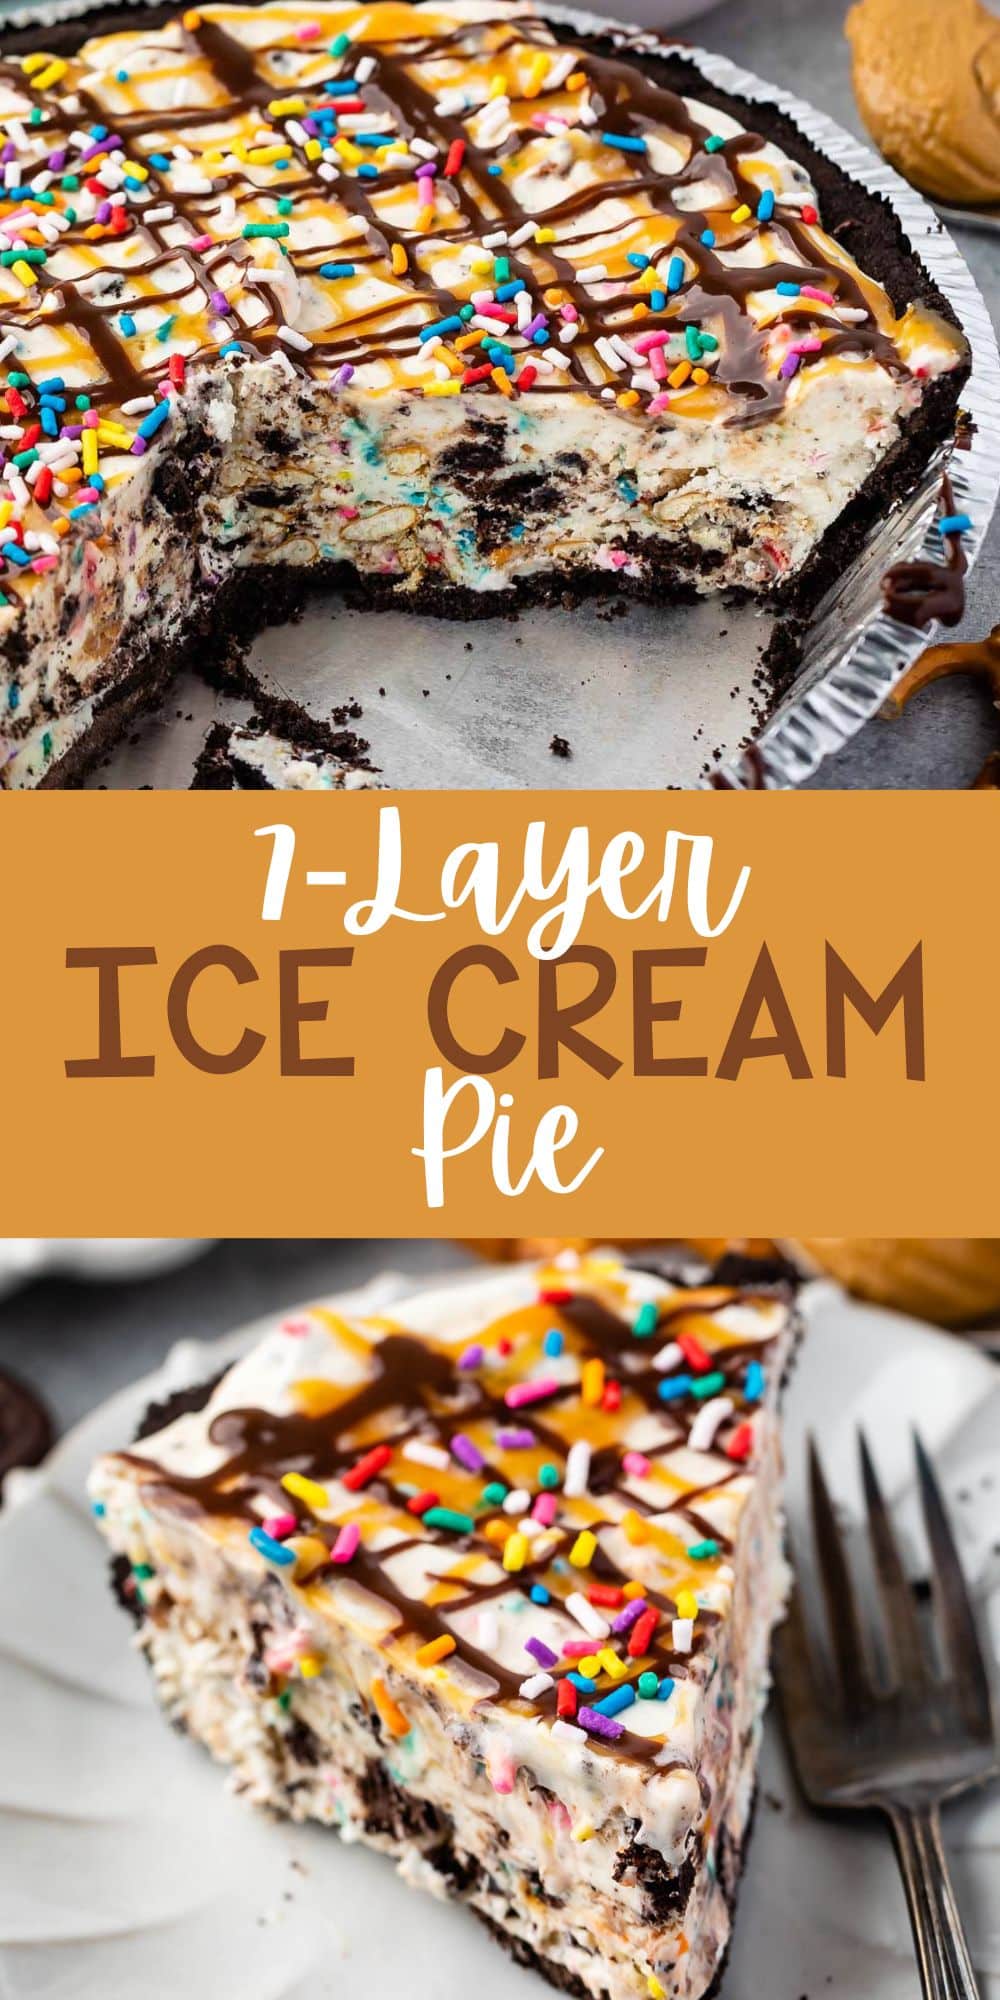 two photos of ice cream pie in a pie tin topped with chocolate and caramel sauce and sprinkles with words on the image.